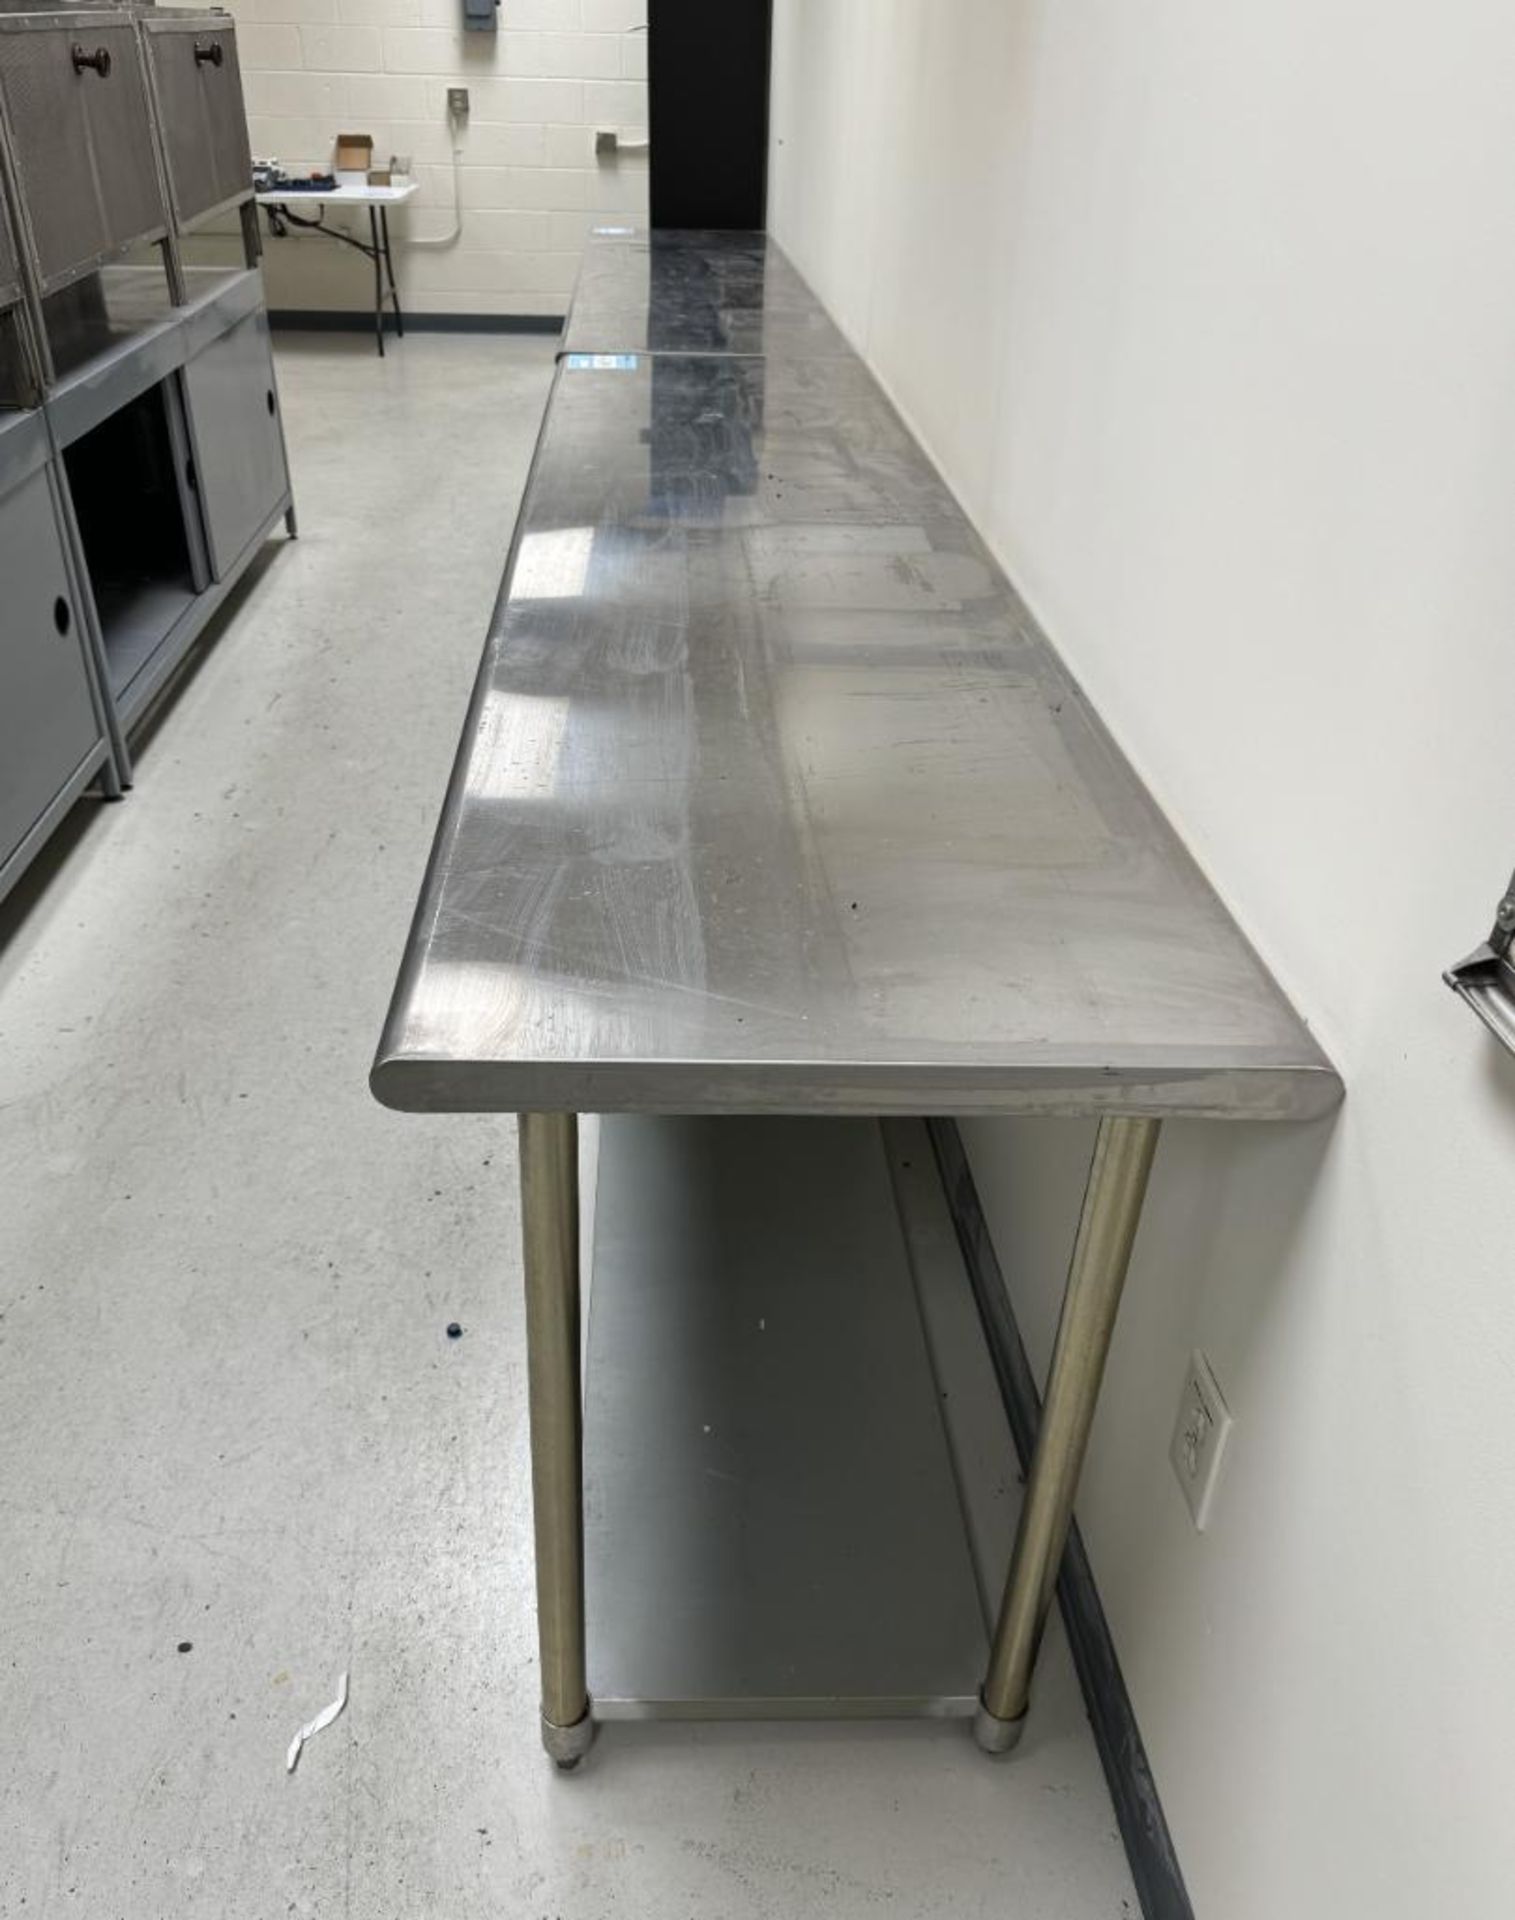 Lot Of (2) Stainless Steel Tables. Approximate 24" x 96". - Image 3 of 3